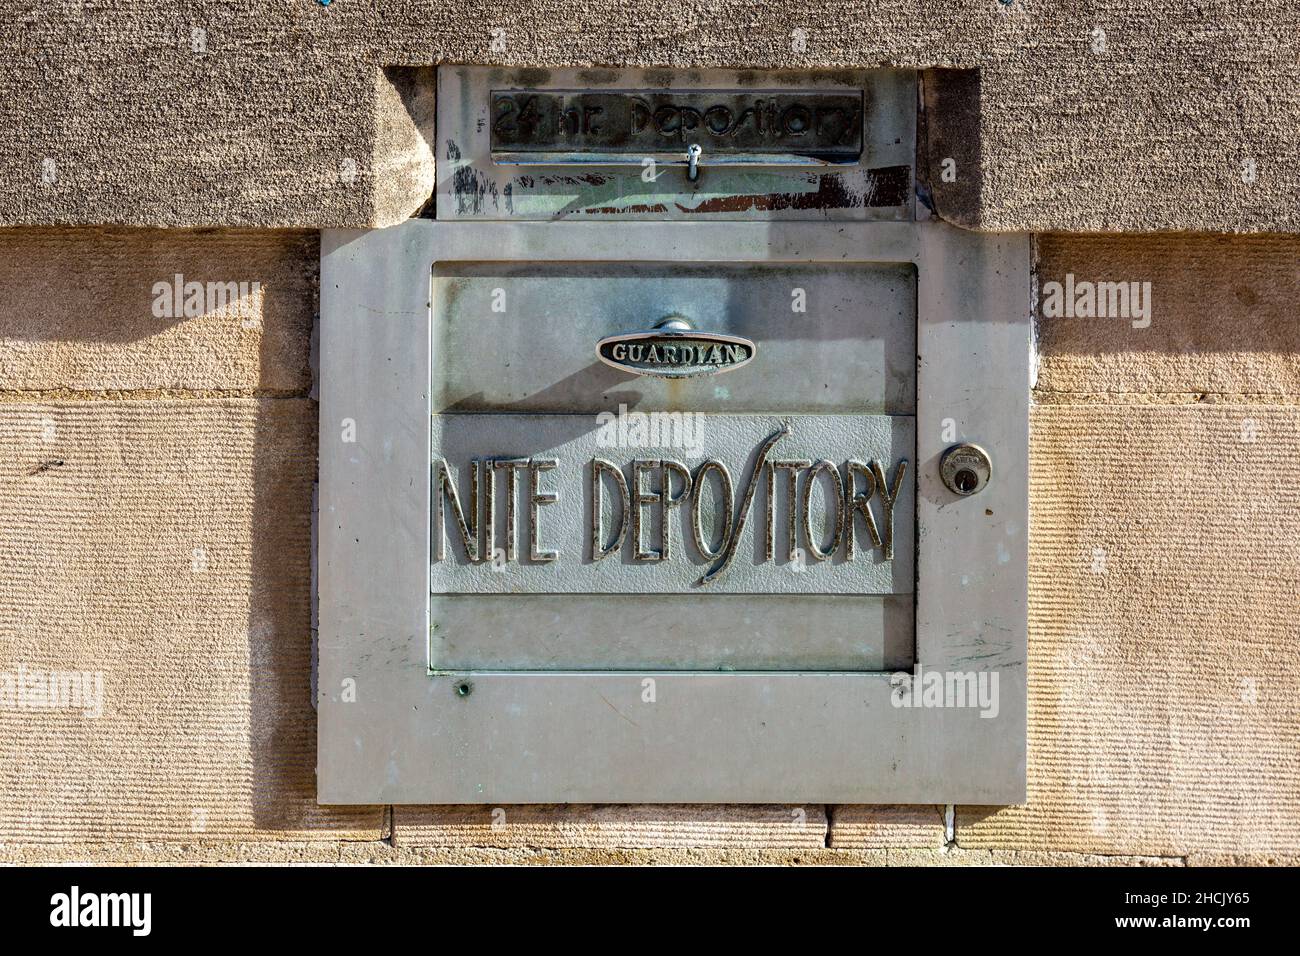 The Guardian night (nite) depository is set in the limestone at the former Studabaker Bank building in Bluffton, Indiana, USA. Stock Photo